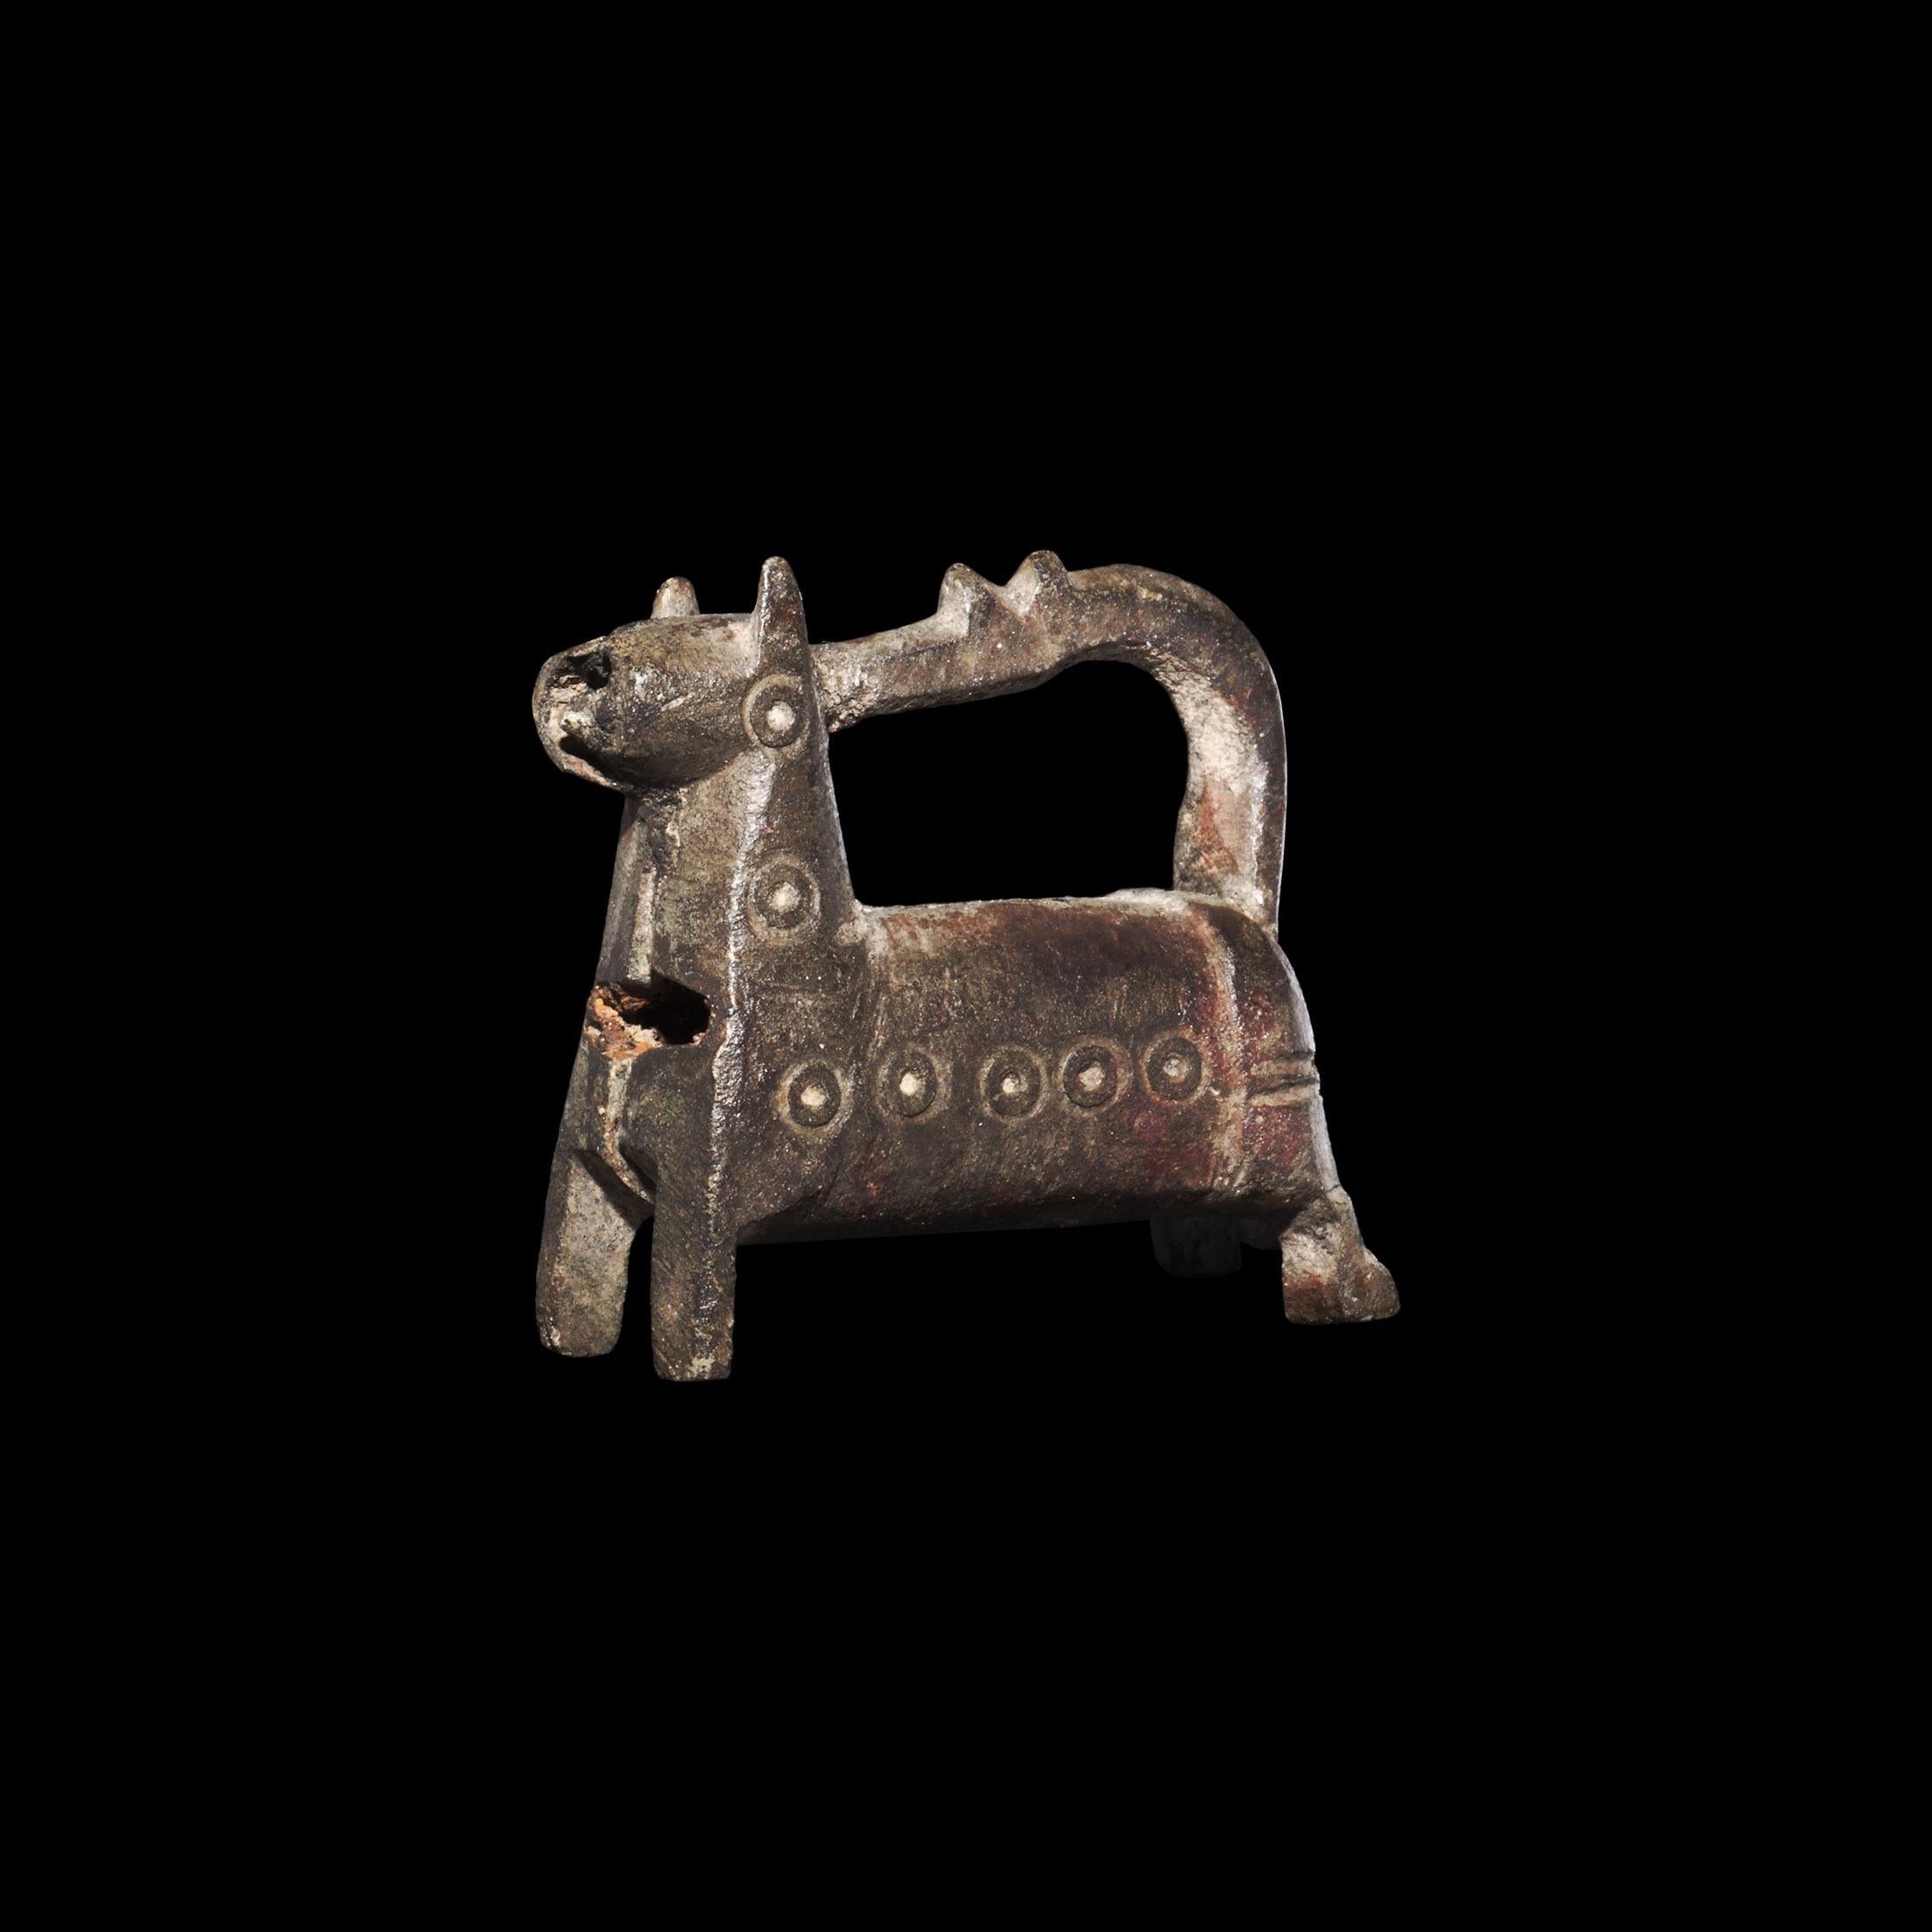 A bronze barrel-lock formed as a standing horse with curved legs, ring-and-dot motifs to the body, the recurved tail forming the hasp. 

33.2 grams, 36mm (1 1/2